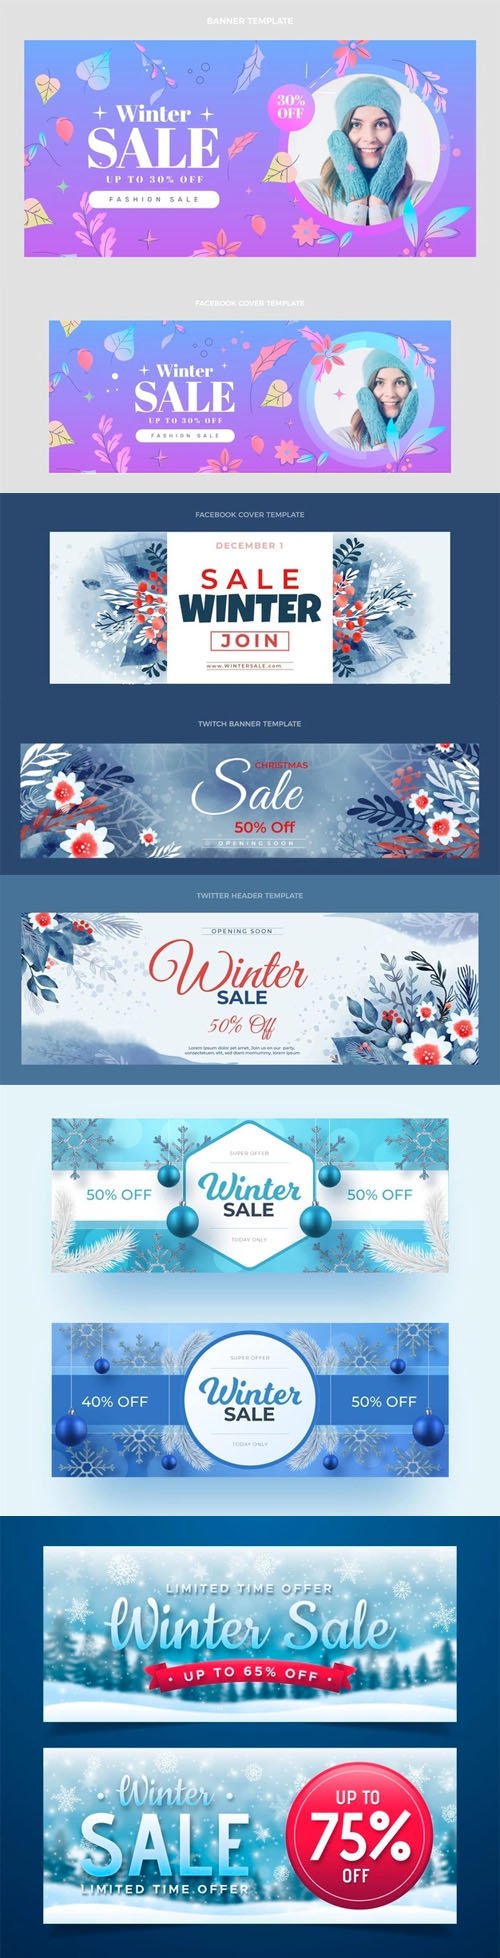 10+ Winter Sale Banners Vector Collection